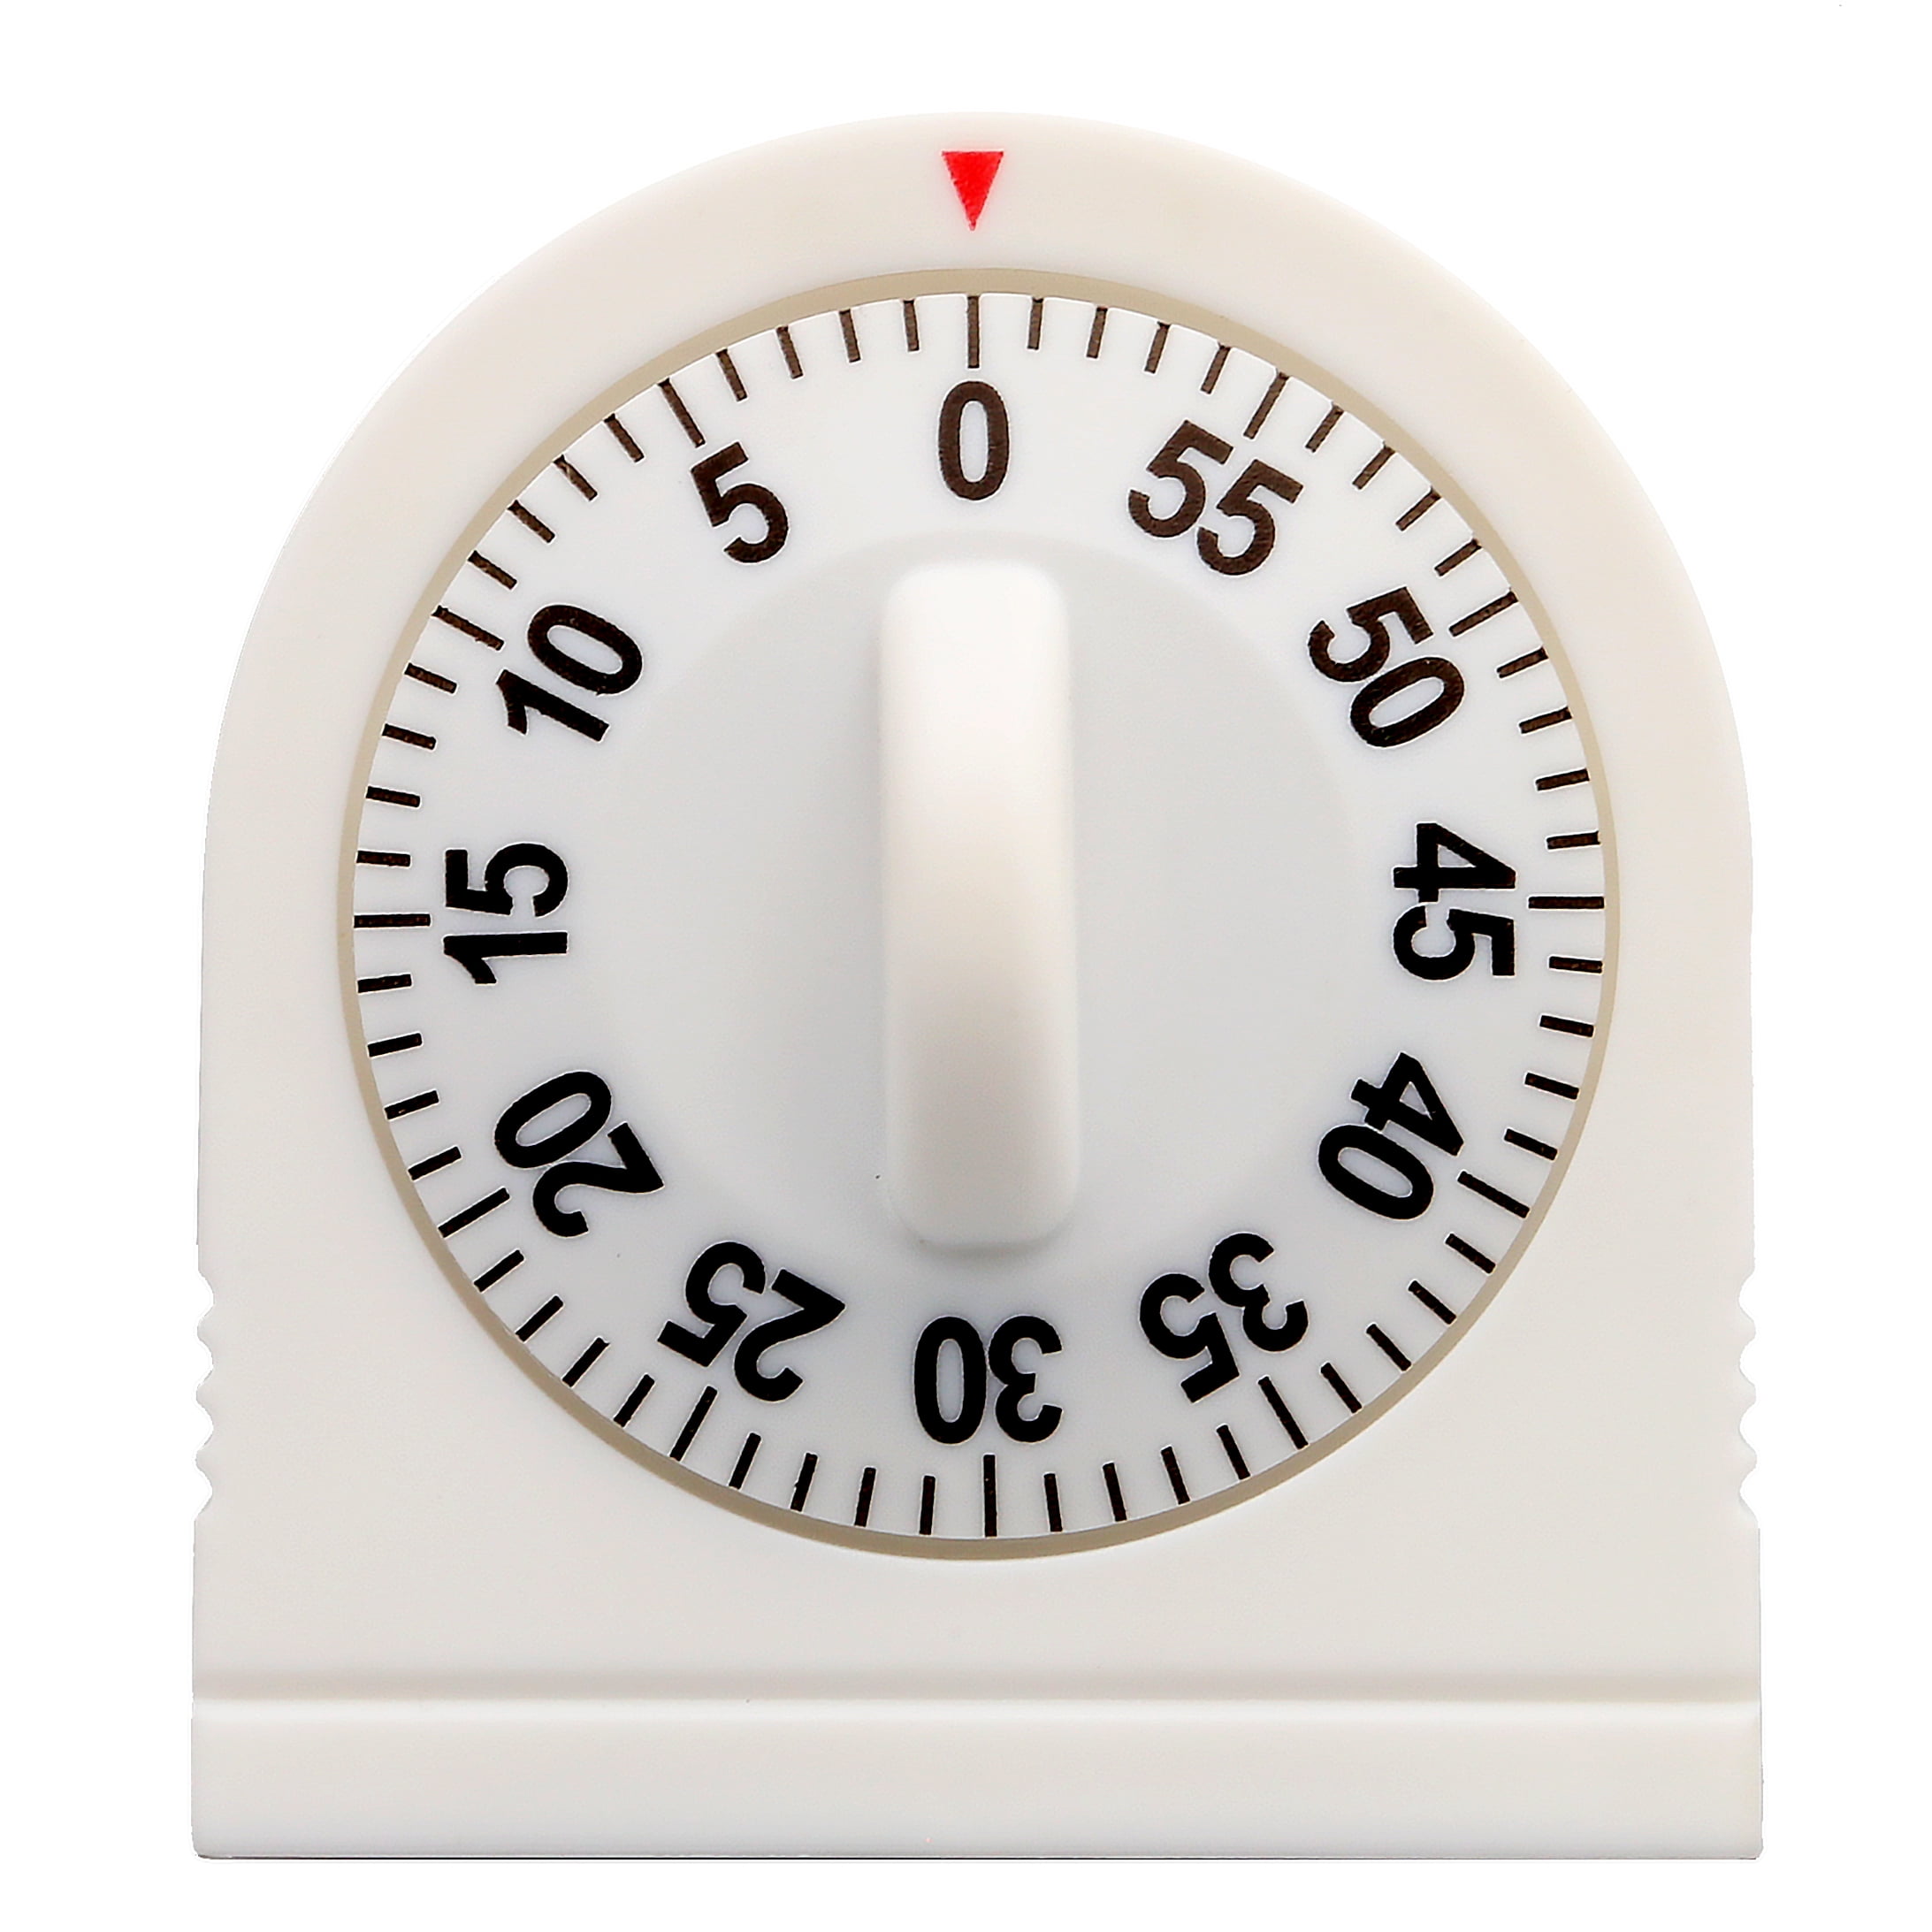 MAINSTAYS ABS Mechanical Timer In White Color With Black Large Numbers  Printing, easy to read display